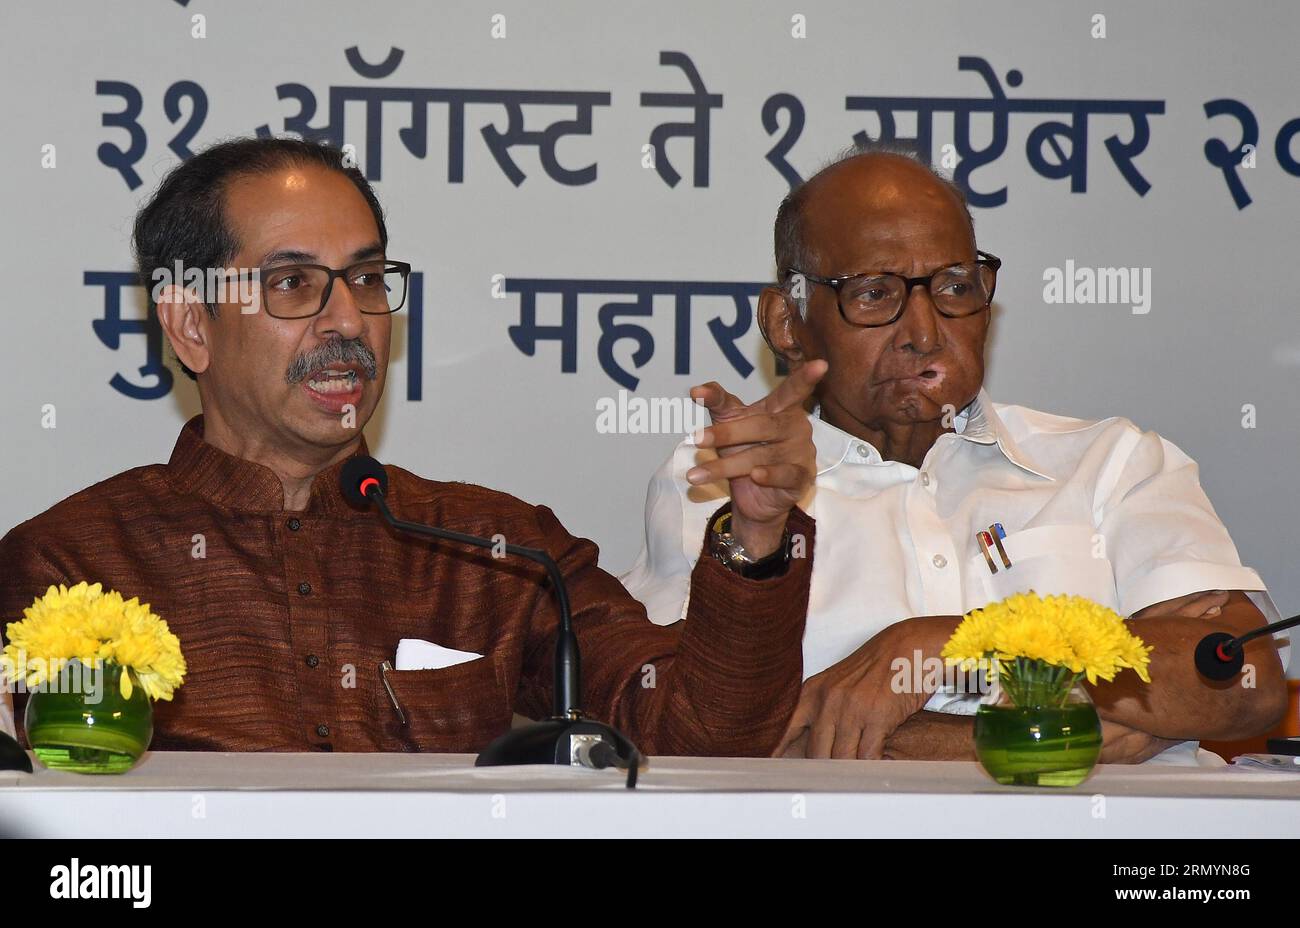 Mumbai, India. 30th Aug, 2023. L-R Shiv Sena (UBT) chief Uddhav Thackeray gestures with his hand as Nationalist Congress Party (NCP) chief Sharad Govindrao Pawar looks on during the Maha Vikas Aghadi (MVA) press conference in Mumbai. The press conference was held ahead of Indian National Developmental Inclusive Alliance (INDIA) third meeting to be held on 31st August and 1st September 2023. (Photo by Ashish Vaishnav/SOPA Images/Sipa USA) Credit: Sipa USA/Alamy Live News Stock Photo